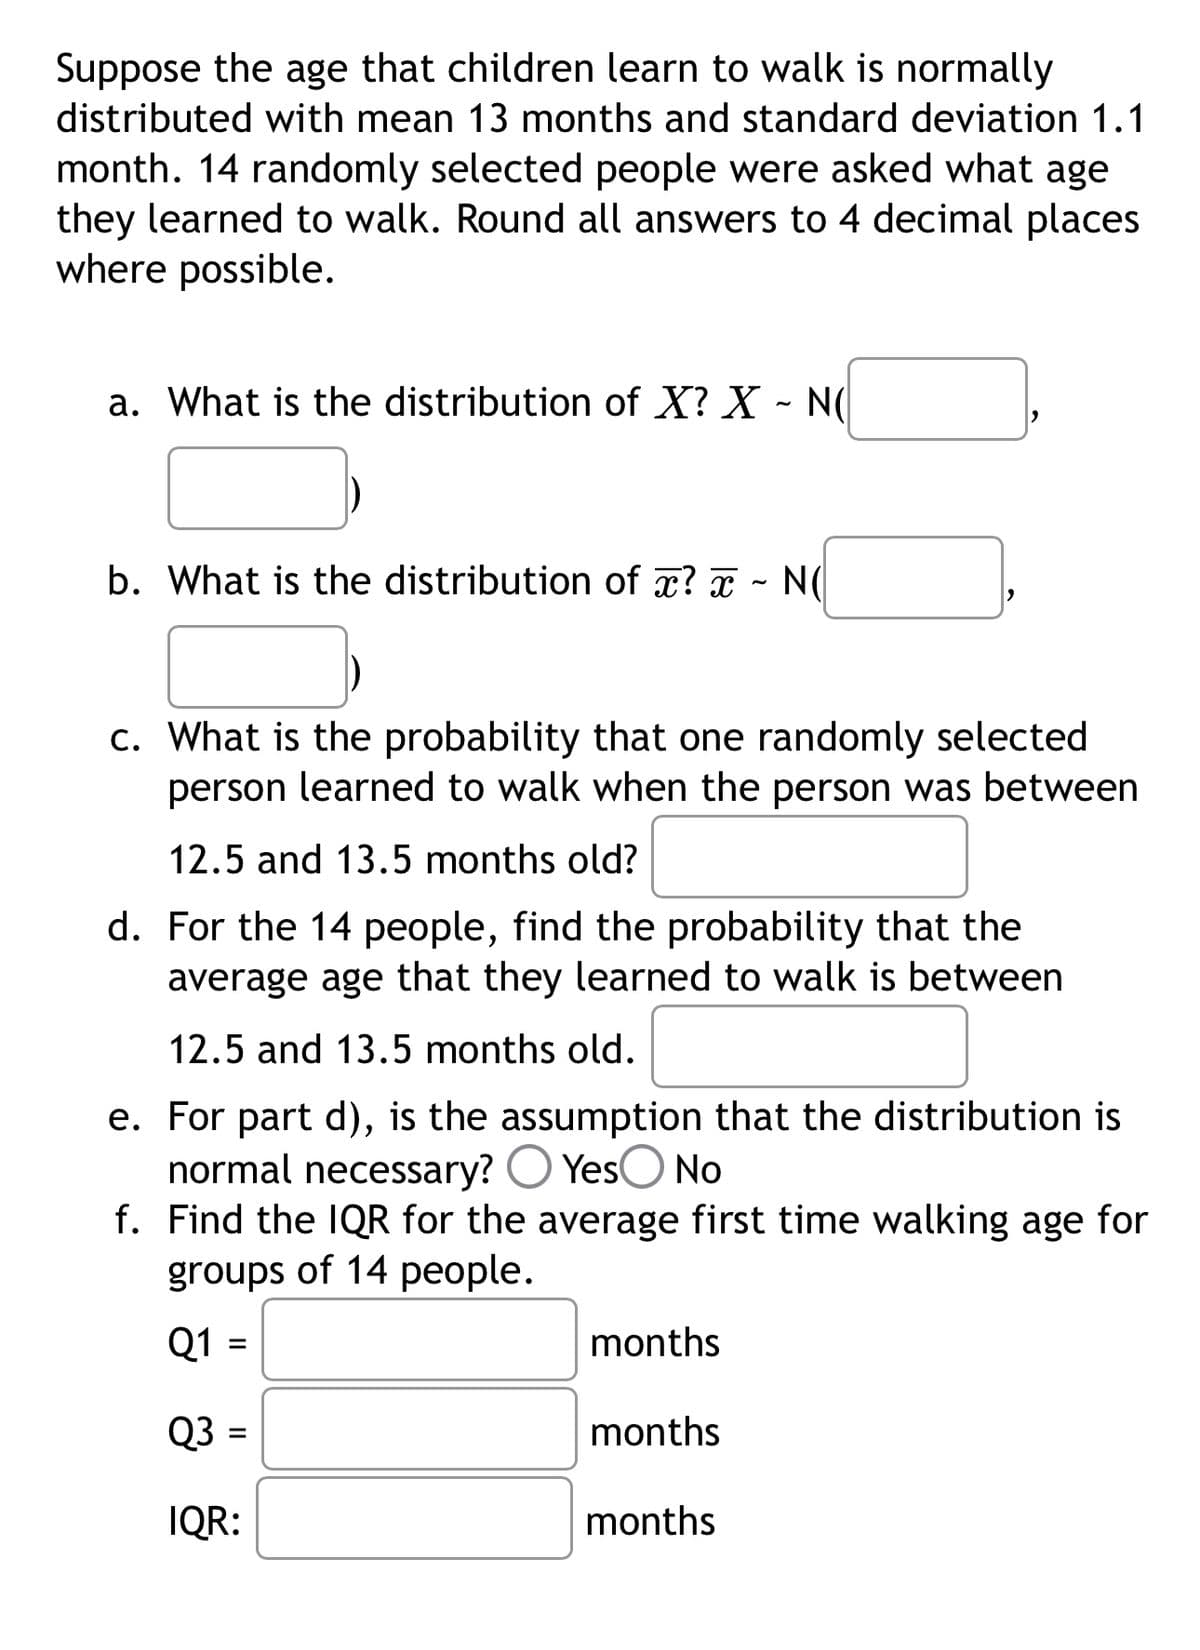 Suppose the age that children learn to walk is normally
distributed with mean 13 months and standard deviation 1.1
month. 14 randomly selected people were asked what age
they learned to walk. Round all answers to 4 decimal places.
where possible.
~
a. What is the distribution of X? X - N
b. What is the distribution of x? - N(
c. What is the probability that one randomly selected
person learned to walk when the person was between
12.5 and 13.5 months old?
d. For the 14 people, find the probability that the
average age that they learned to walk is between
12.5 and 13.5 months old.
e. For part d), is the assumption that the distribution is
normal necessary? Yes No
f. Find the IQR for the average first time walking age for
groups of 14 people.
Q1 =
Q3 =
IQR:
months
months
months